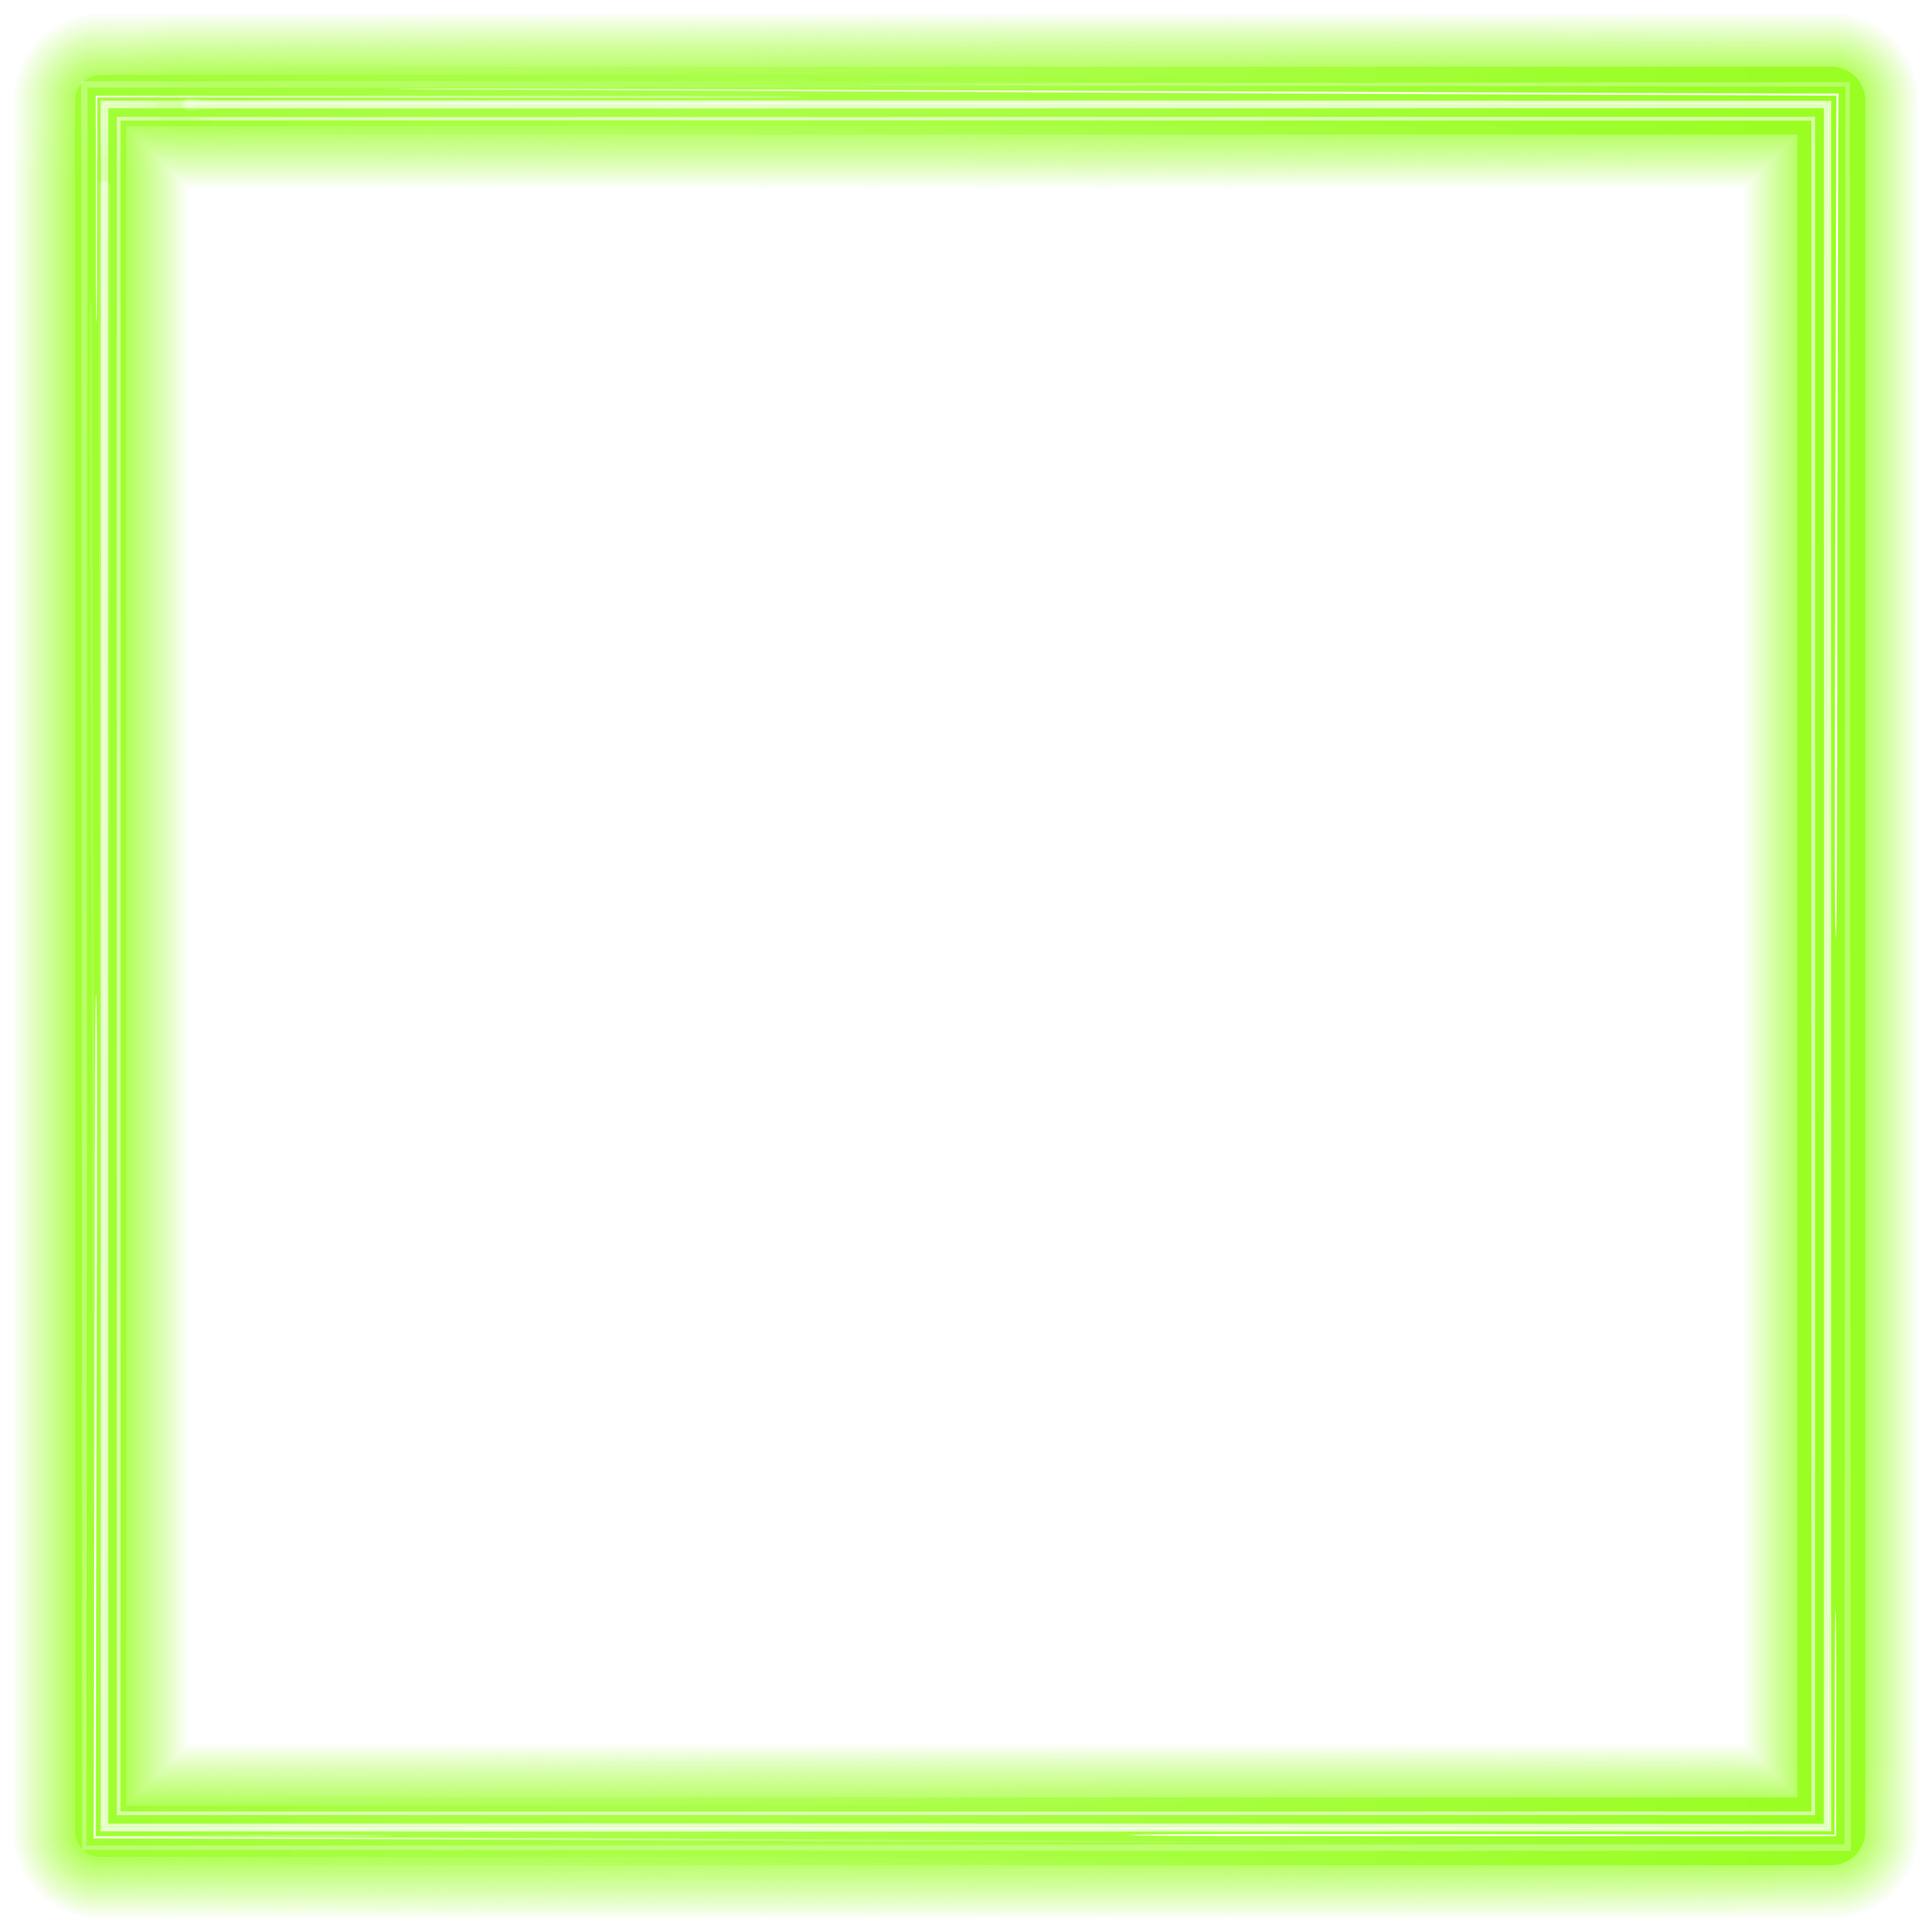 Green Neon Border Frame PNG Clipart | Gallery Yopriceville - High